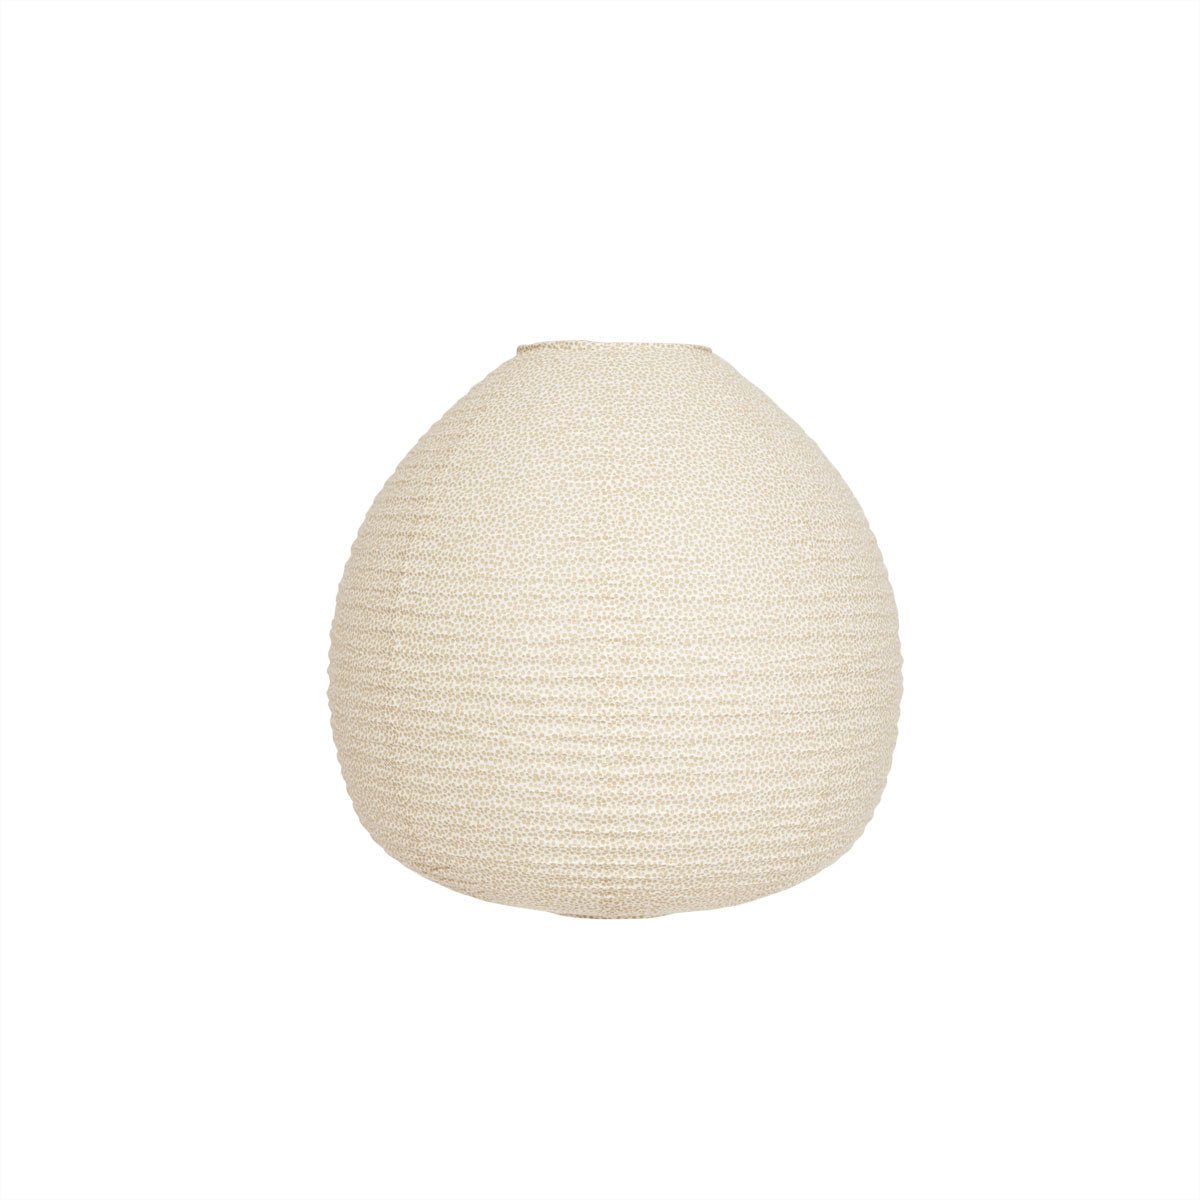 OYOY Living - Kojo Paper Shade Small - Sand (L300854)